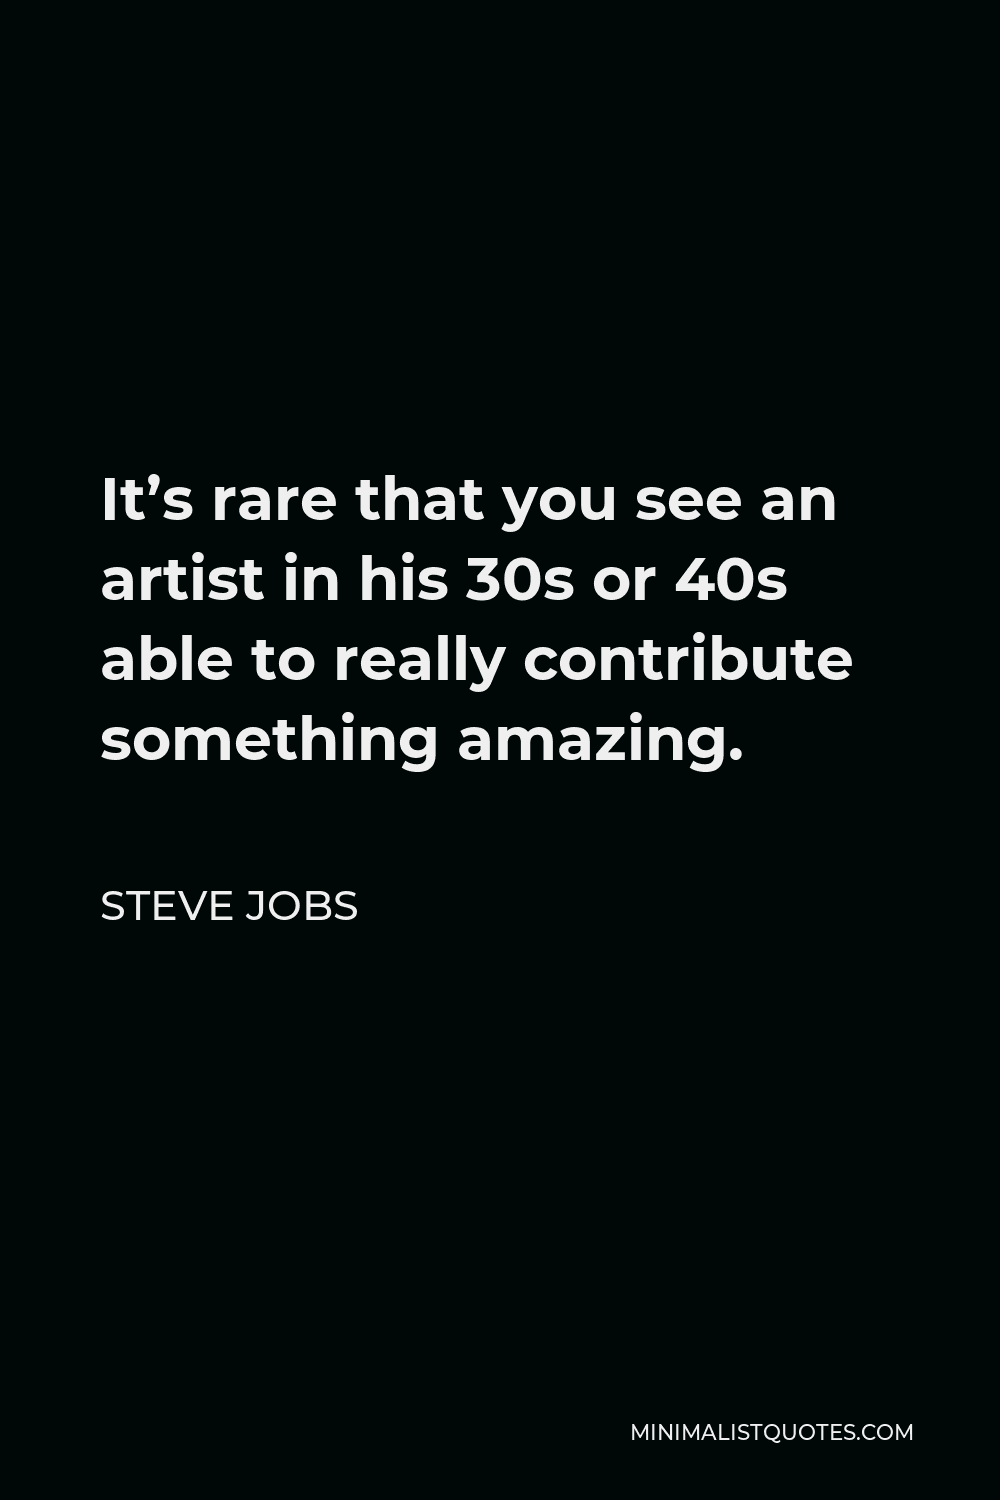 Steve Jobs Quote - It’s rare that you see an artist in his 30s or 40s able to really contribute something amazing.